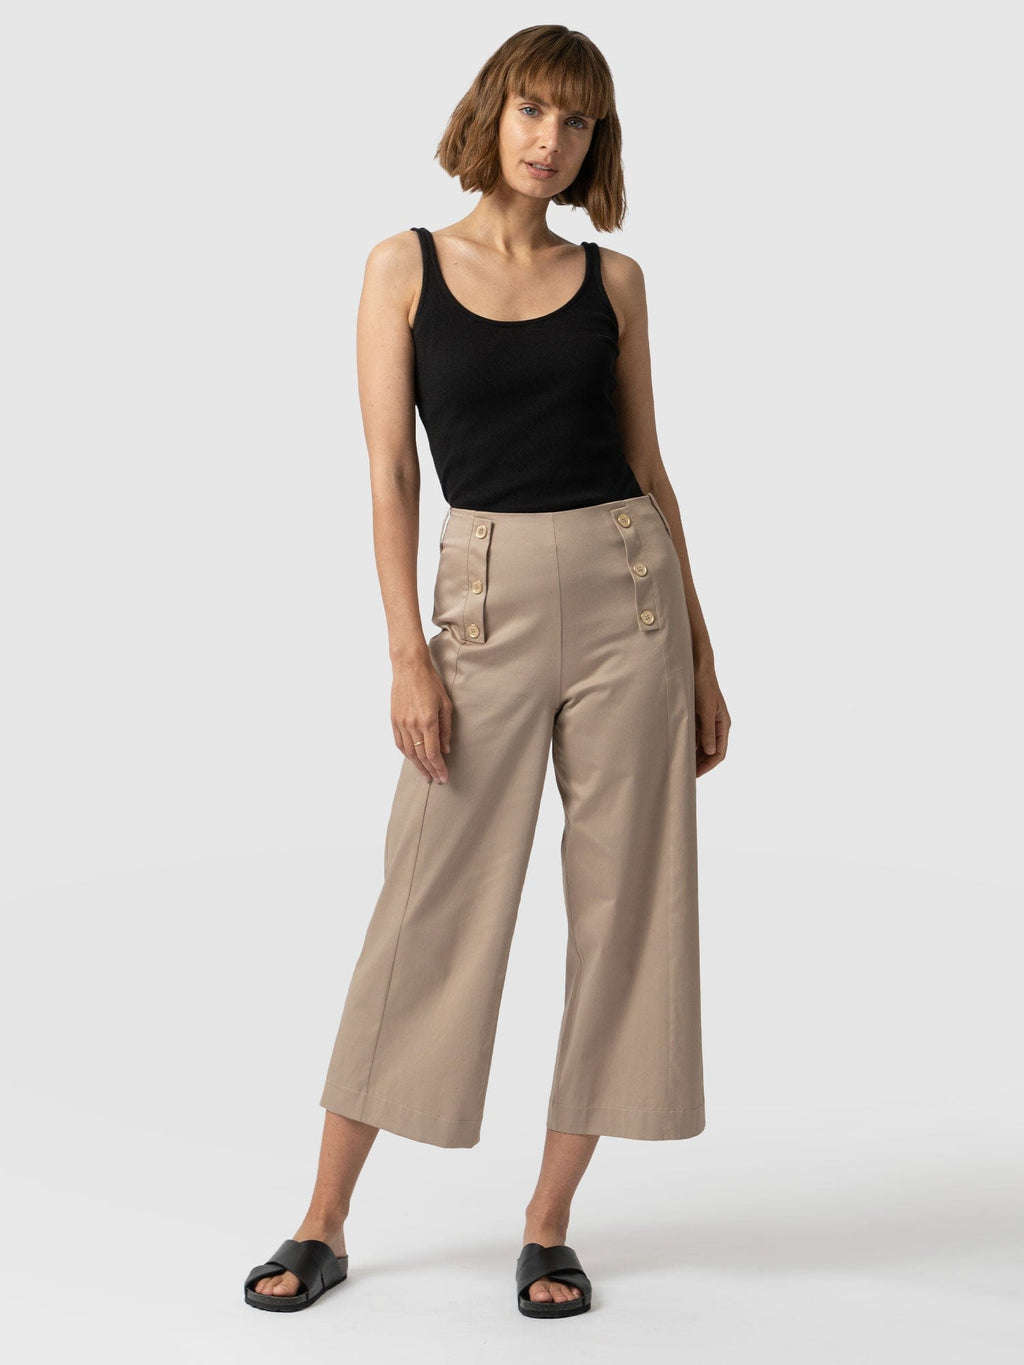 Briefs and Culotte: Maximum Comfort and Perfect Fit